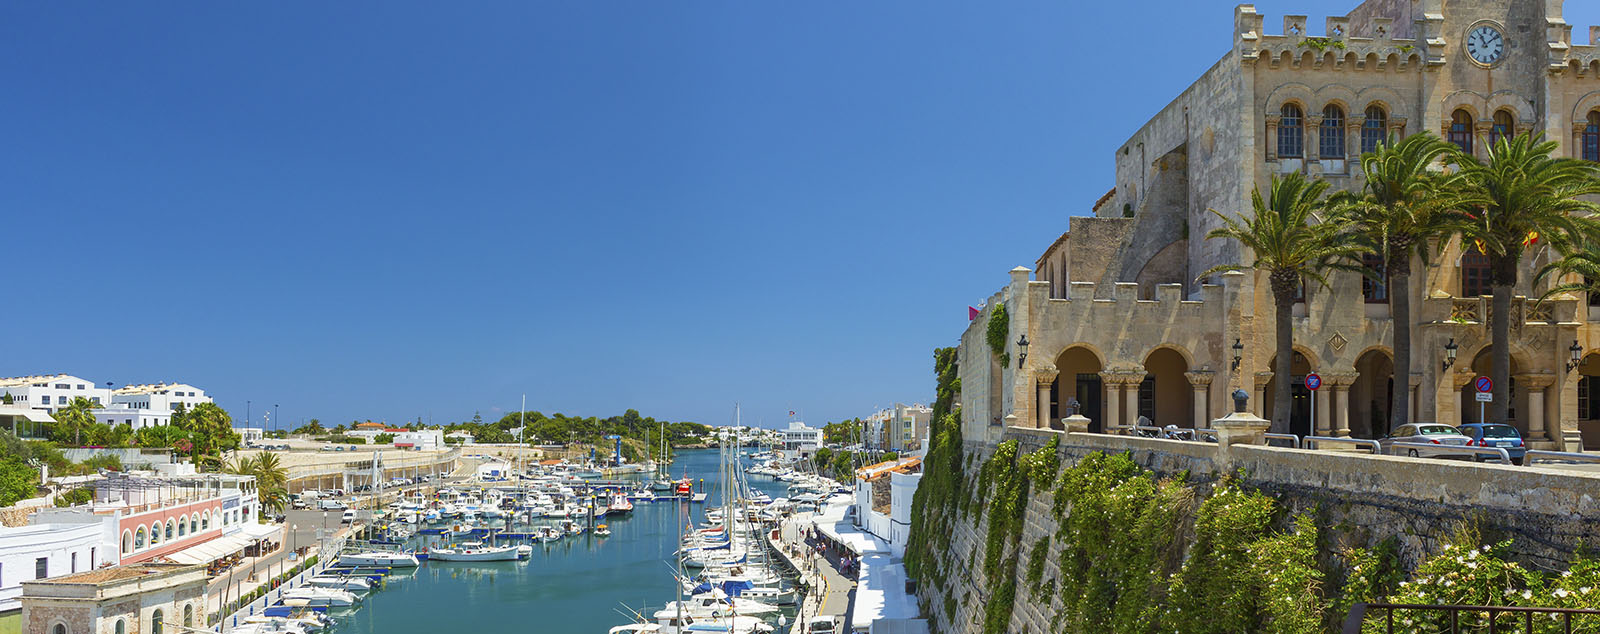 A view across the harbour in Ciutadella. A large and grand building stands over looking boats bobbing in the water